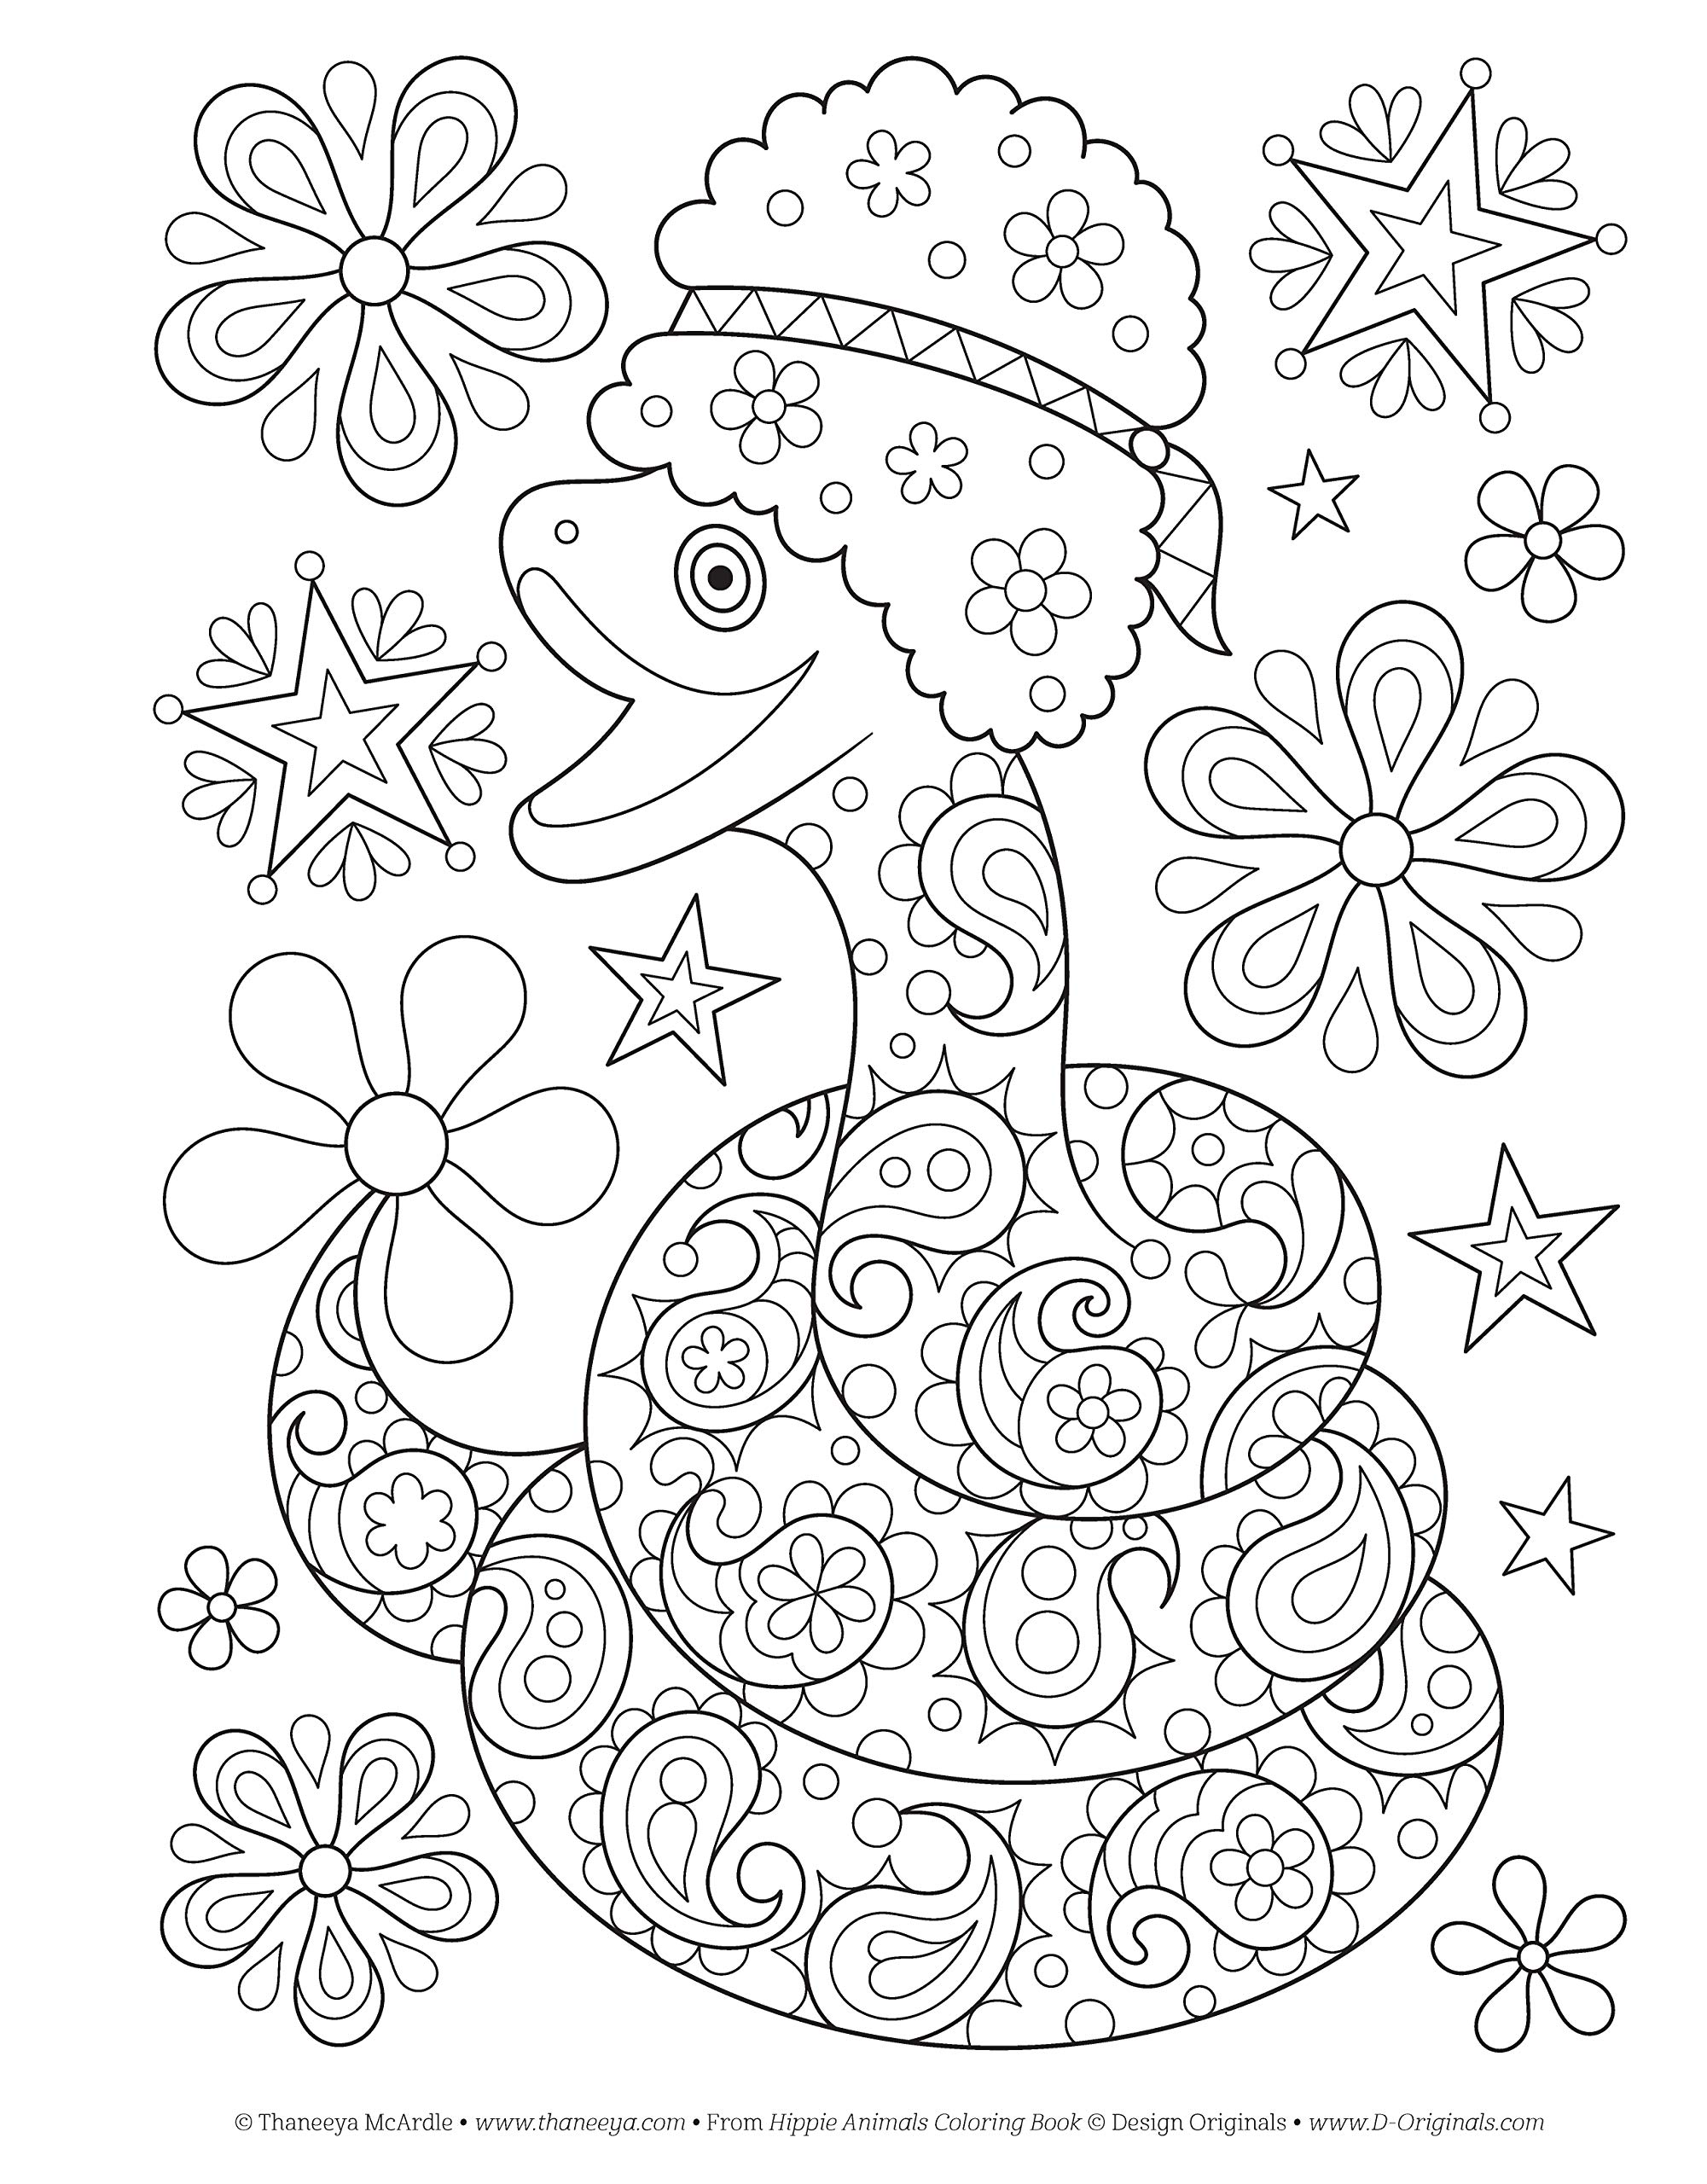 Amazon.com: Hippie Animals Coloring Book (Coloring is Fun) (Design  Originals) 32 Groovy, Totally Chill Animal Designs from Thaneeya McArdle,  on High-Quality, Extra-Thick Perforated Pages Resist Bleed-Through  (9781497202085): McArdle, Thaneeya: Books